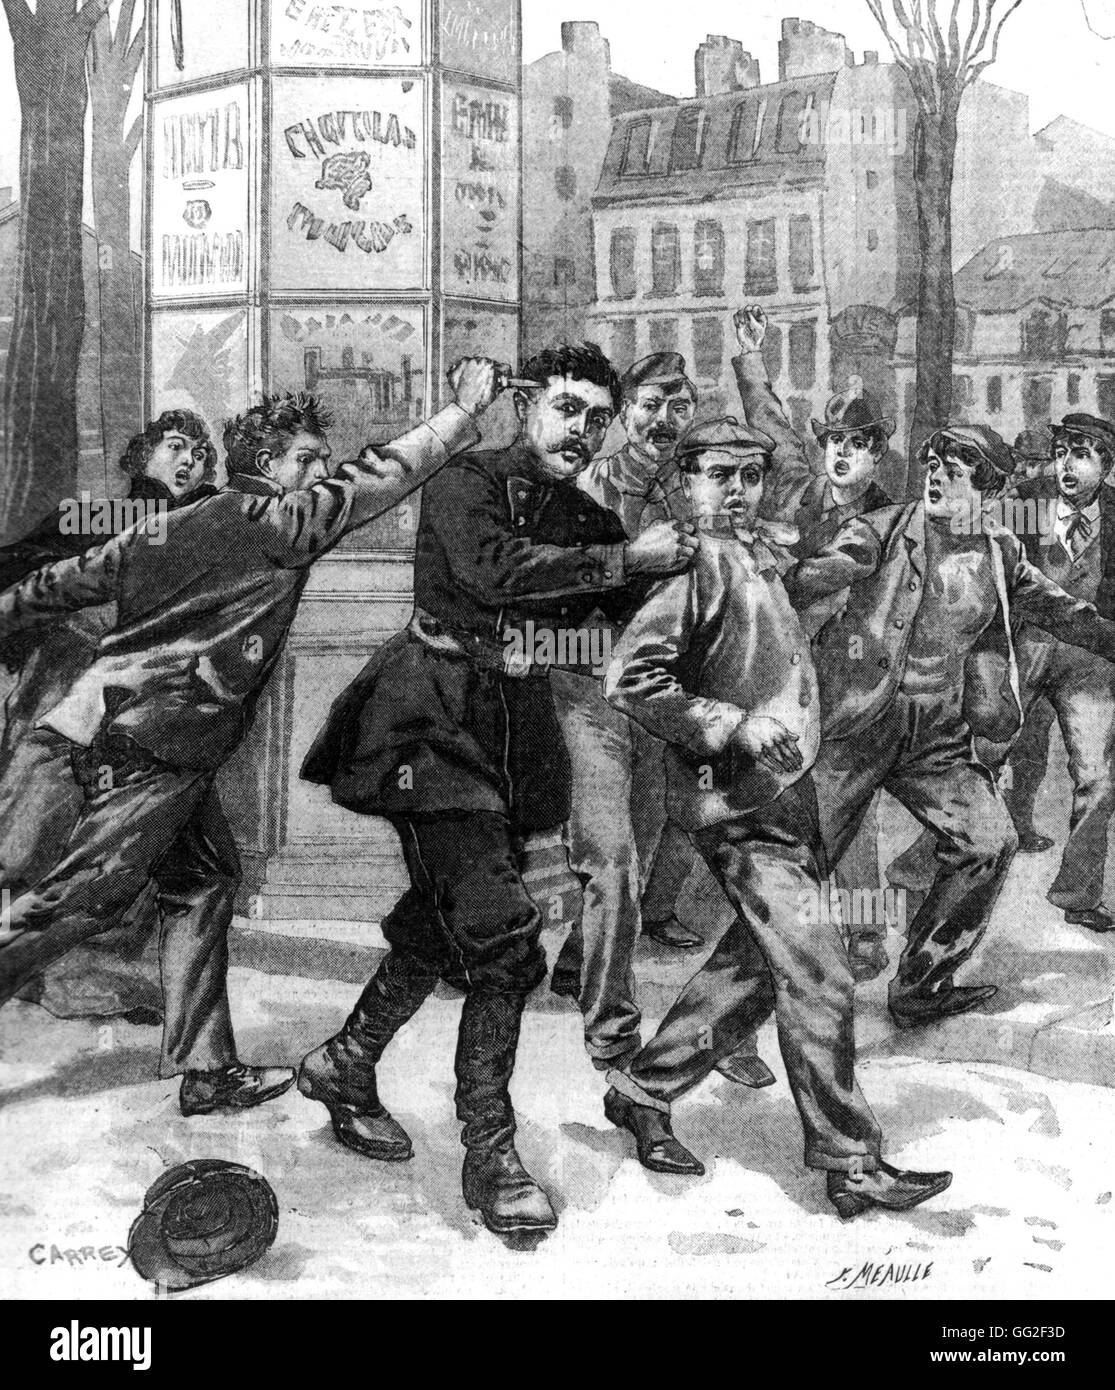 Anarchist attack. Assassination of a policeman 1900 France Stock Photo